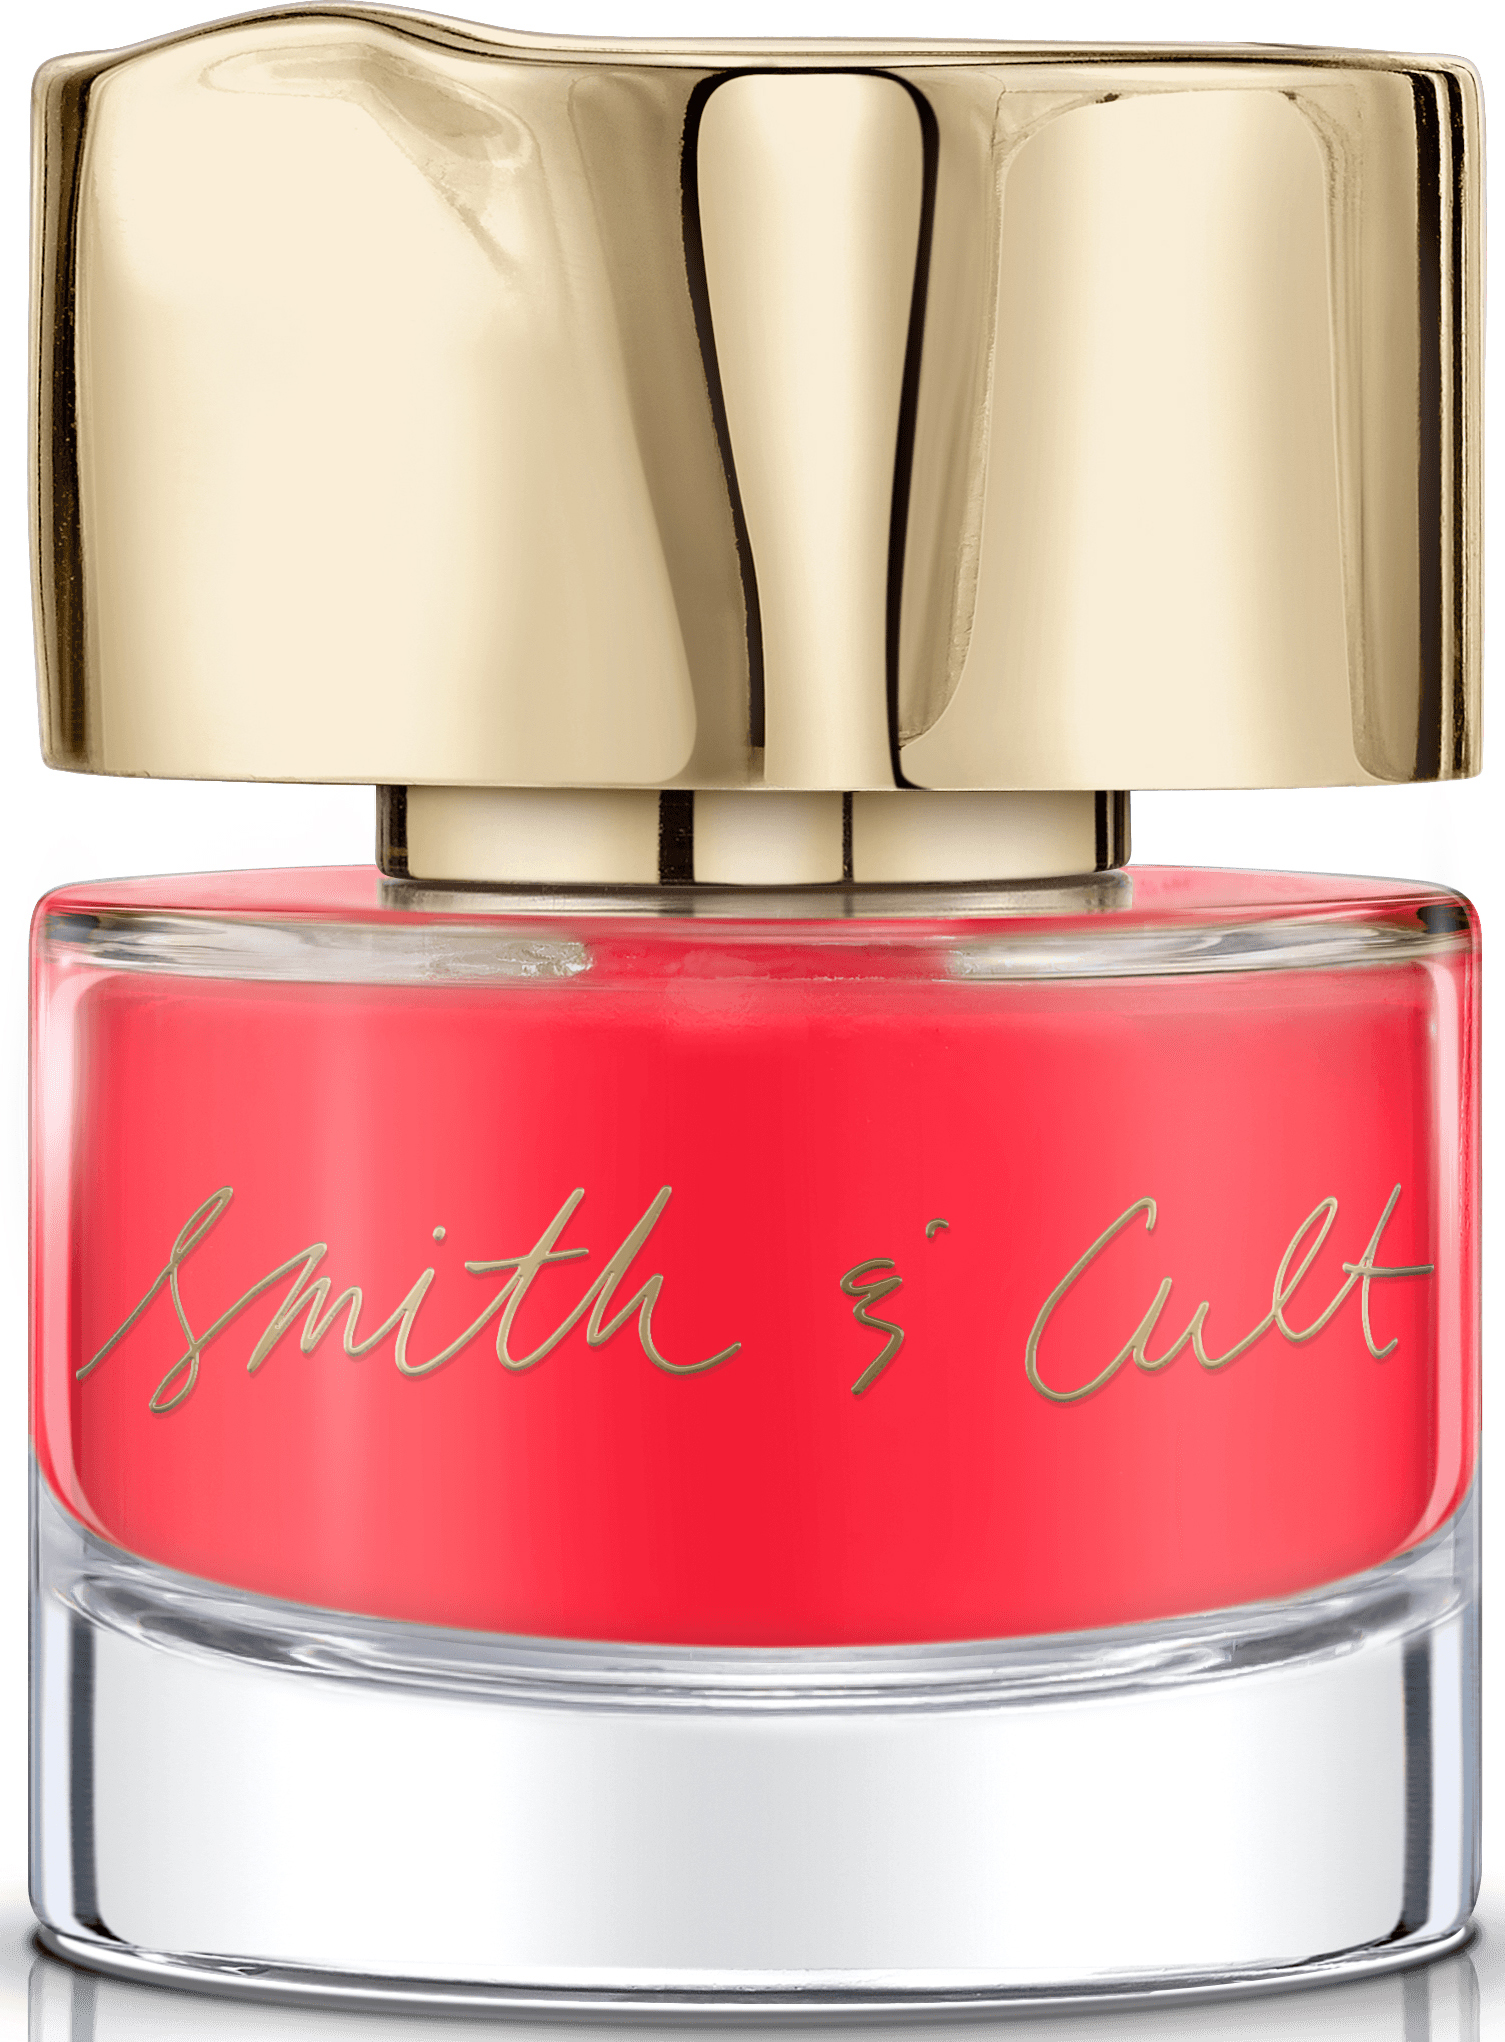 Smith & Cult Nailed Lacquer Psycho Candy